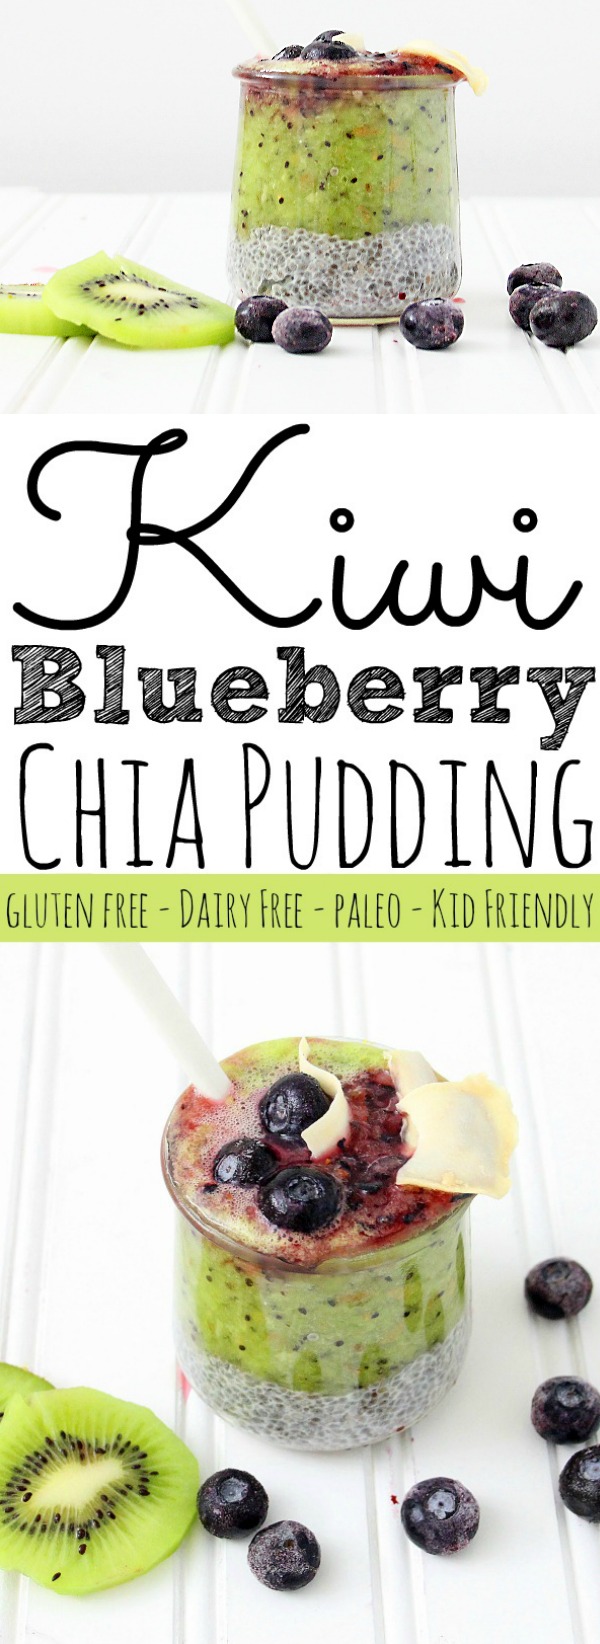 Easy Breakfast Chia Pudding Recipe with Kiwi and Blueberry